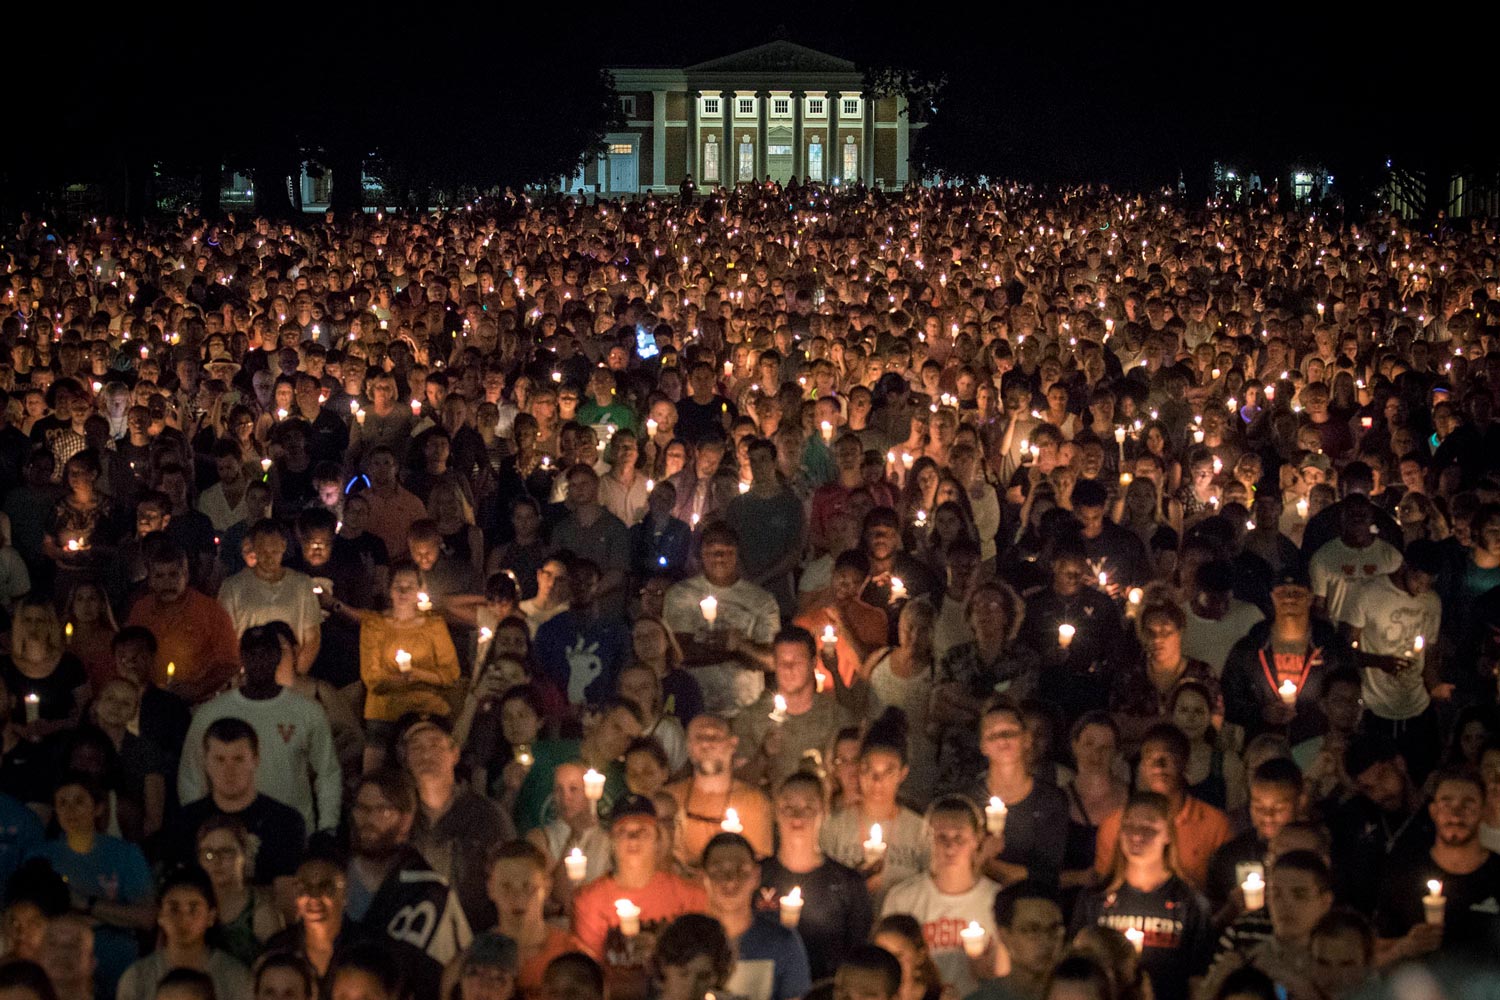 The Lawn filled with people holding candles